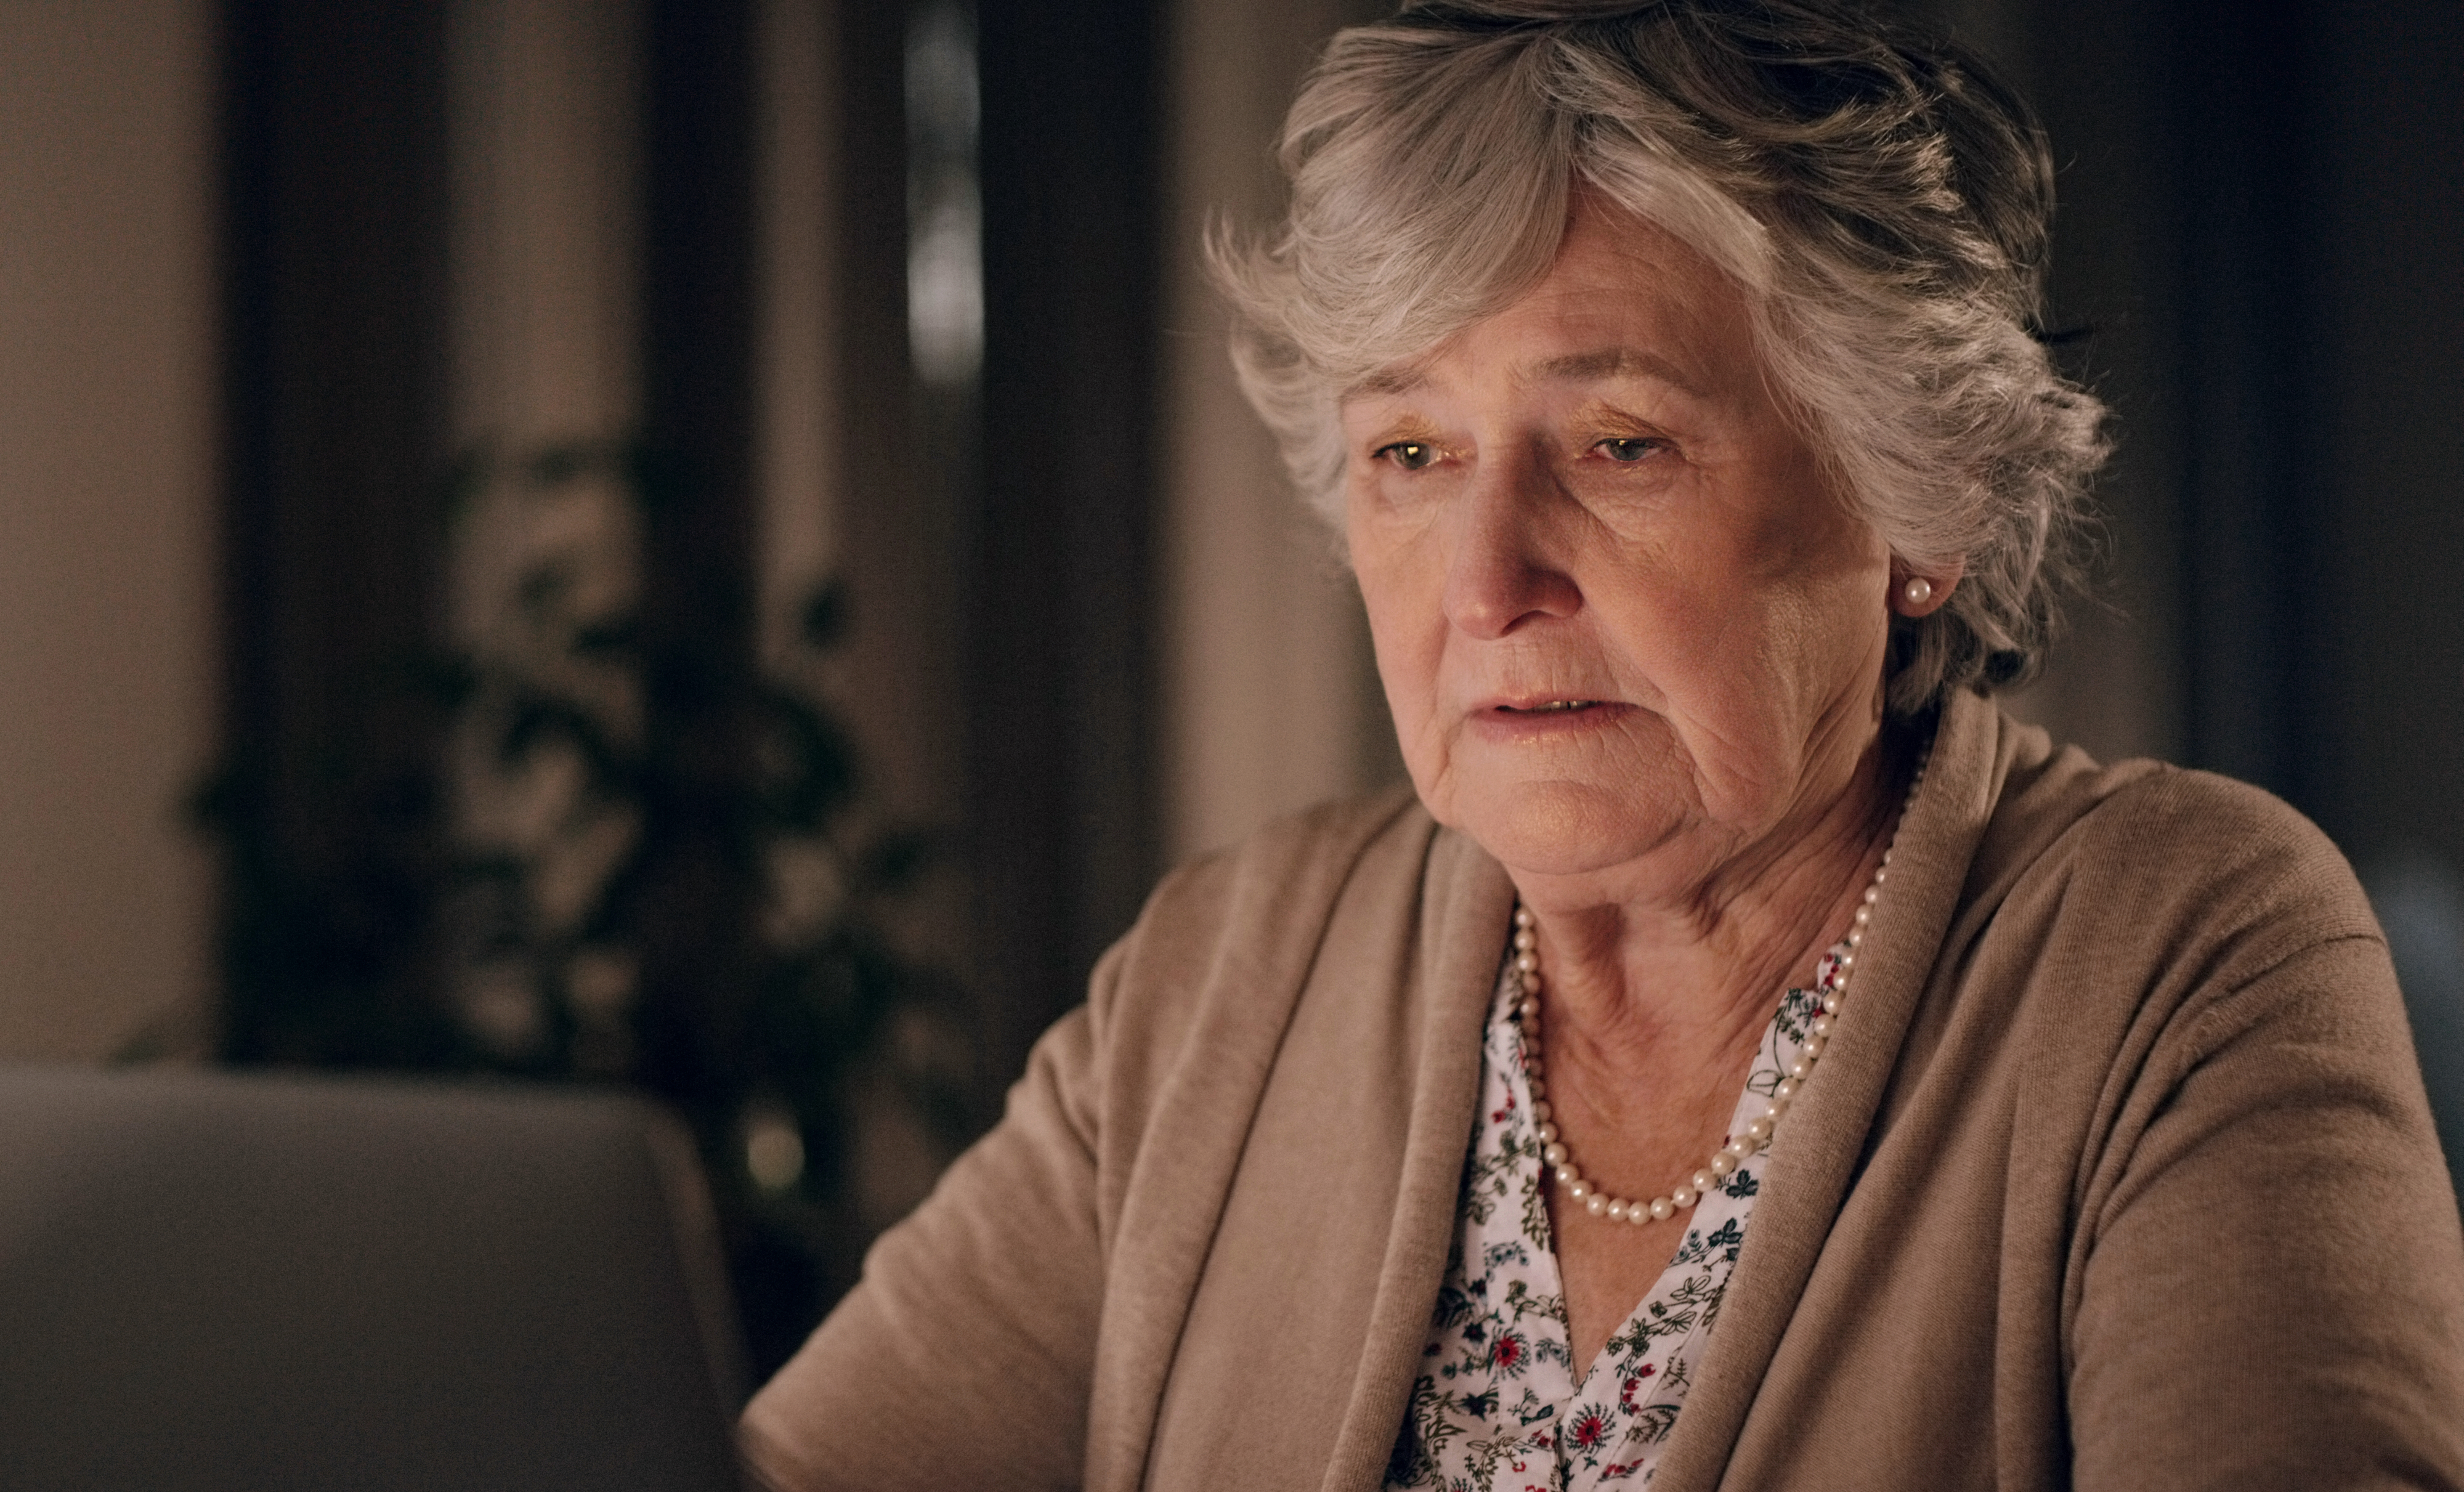 An older woman sitting in front of a laptop and looking sad